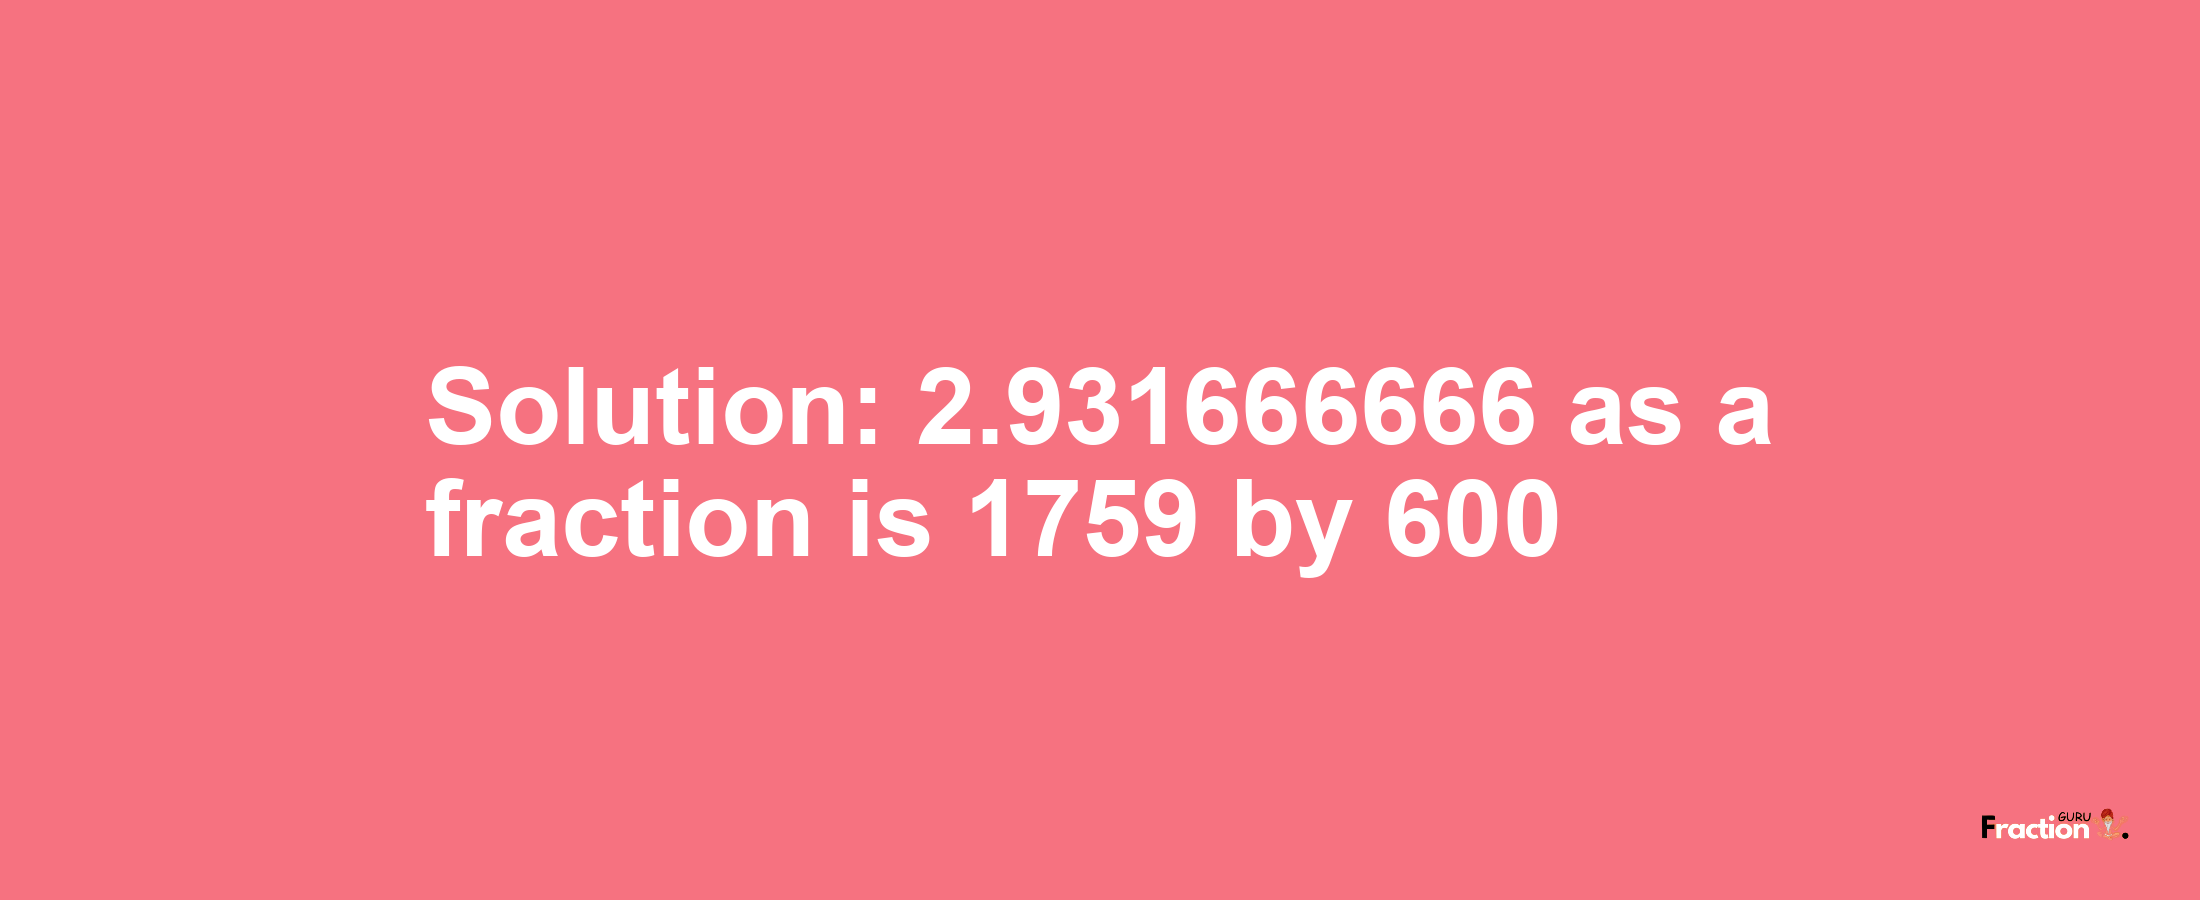 Solution:2.931666666 as a fraction is 1759/600